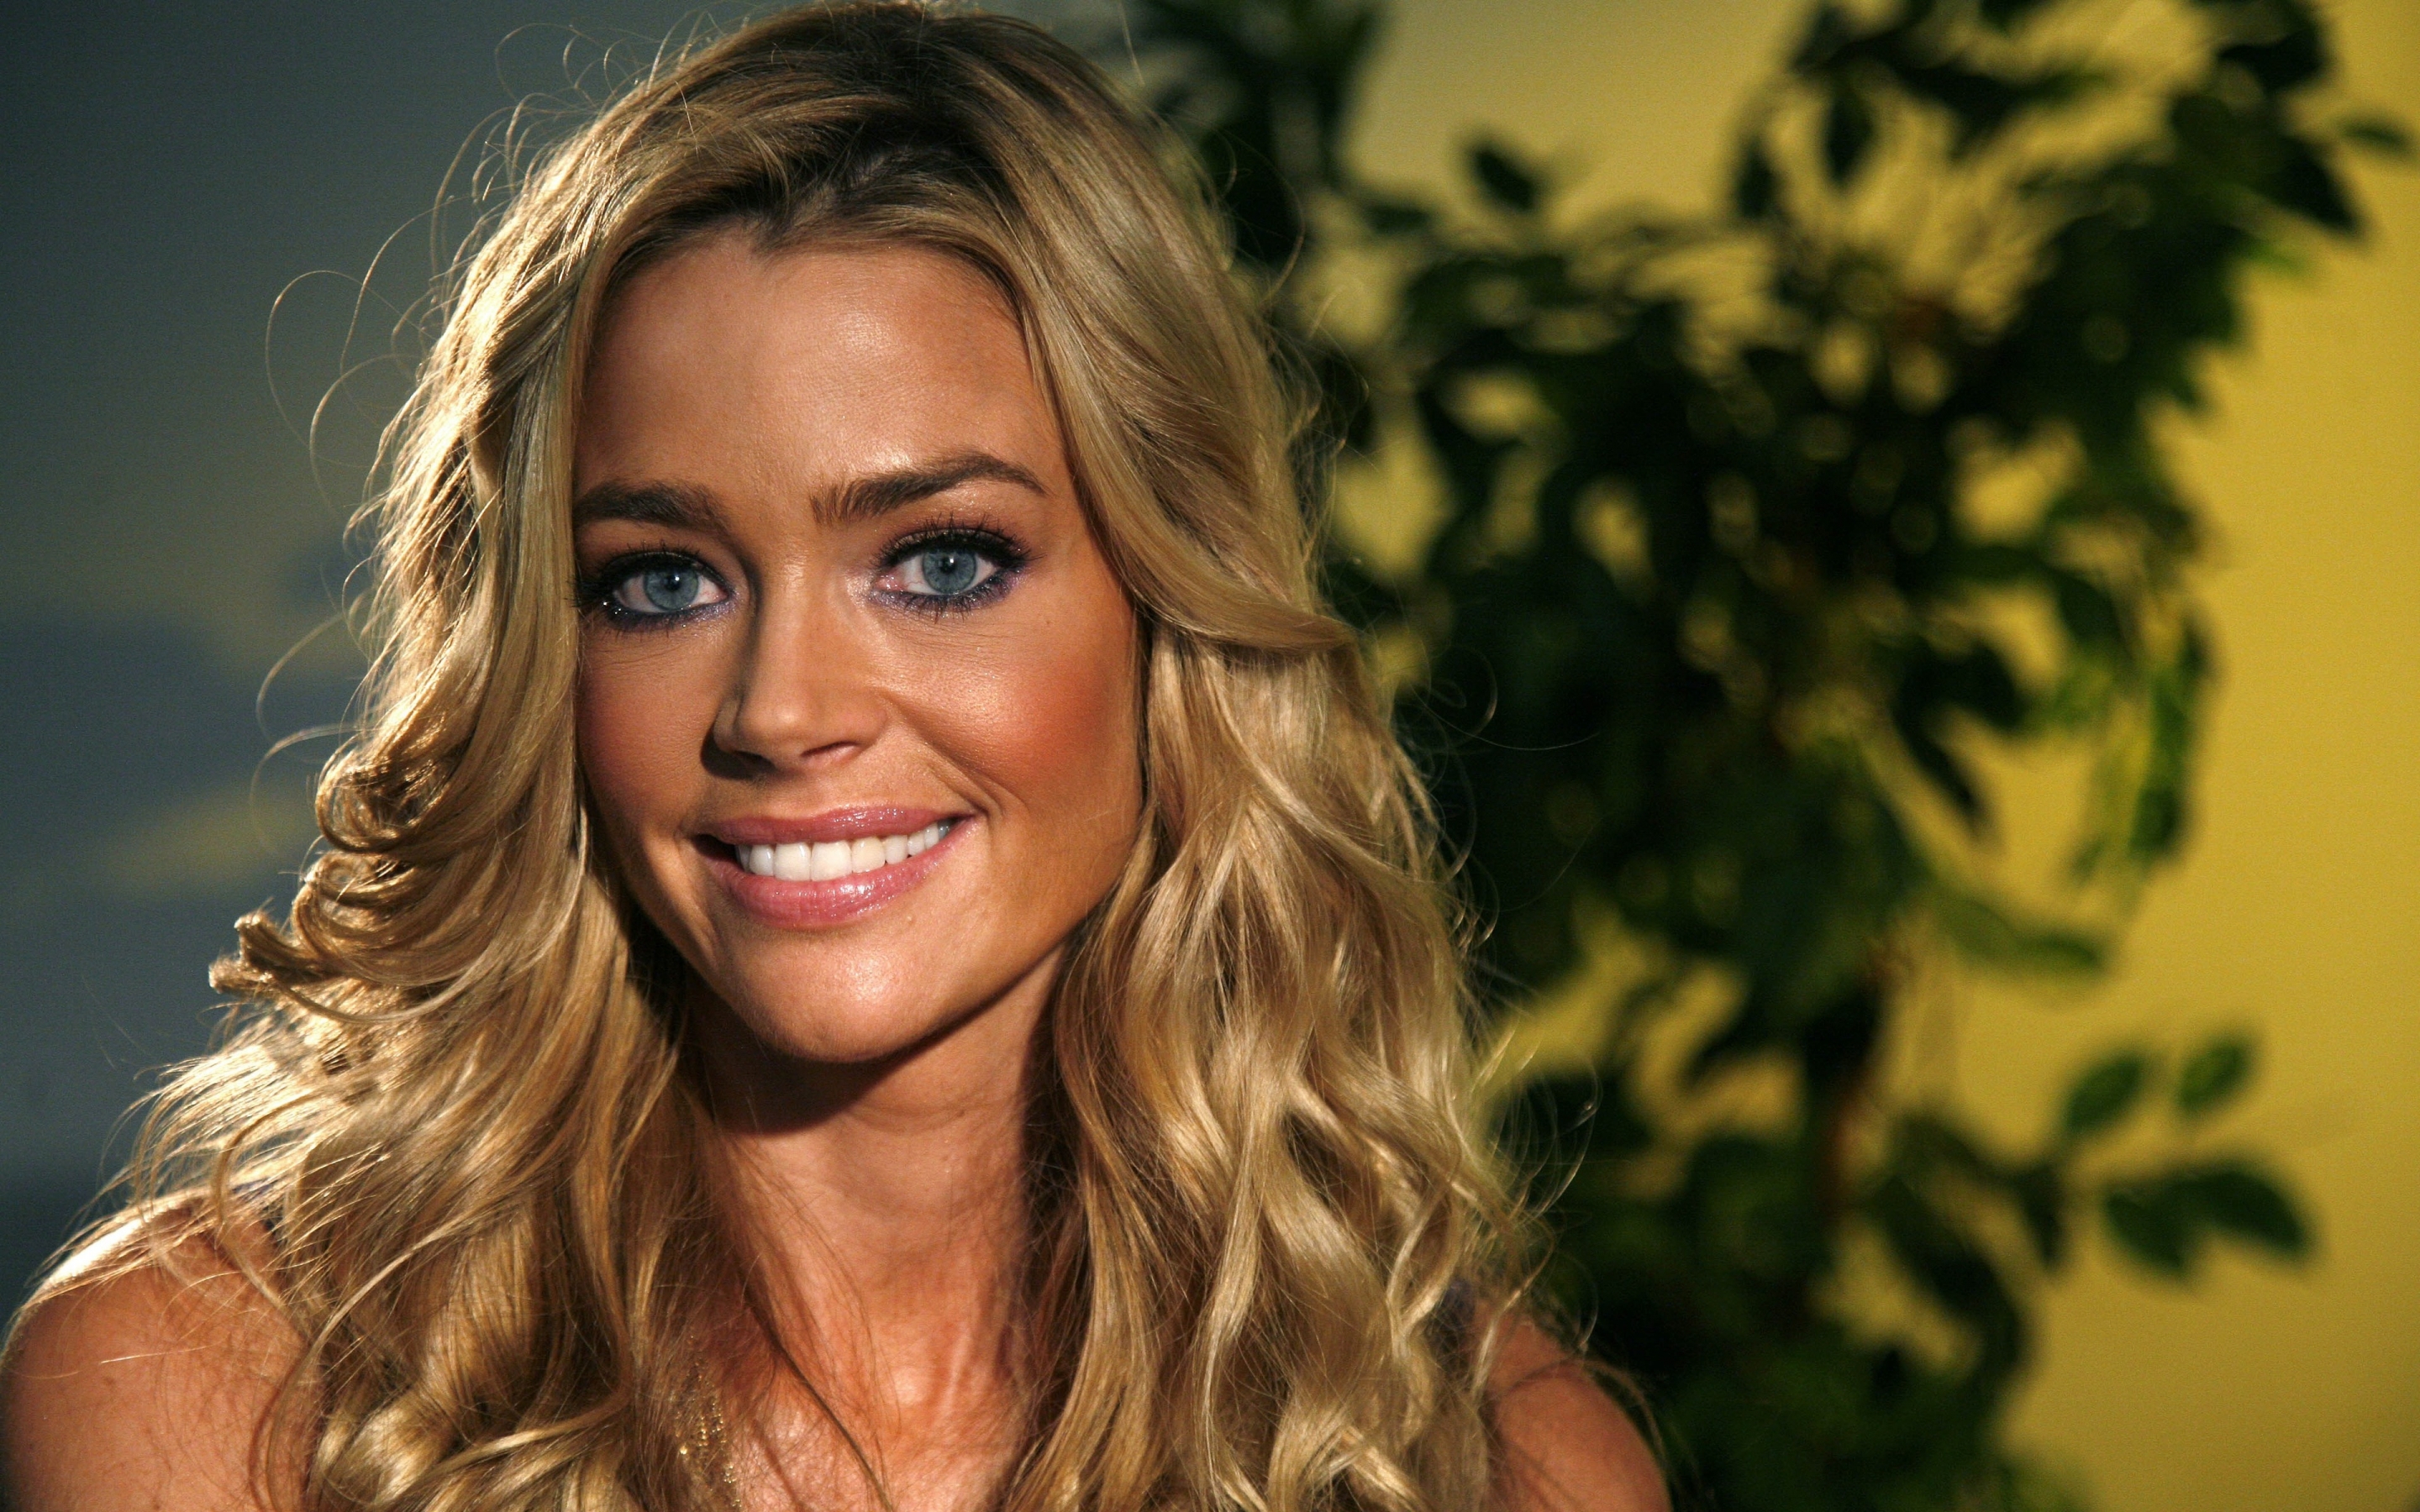 Denise Richards Tanned for 2880 x 1800 Retina Display resolution